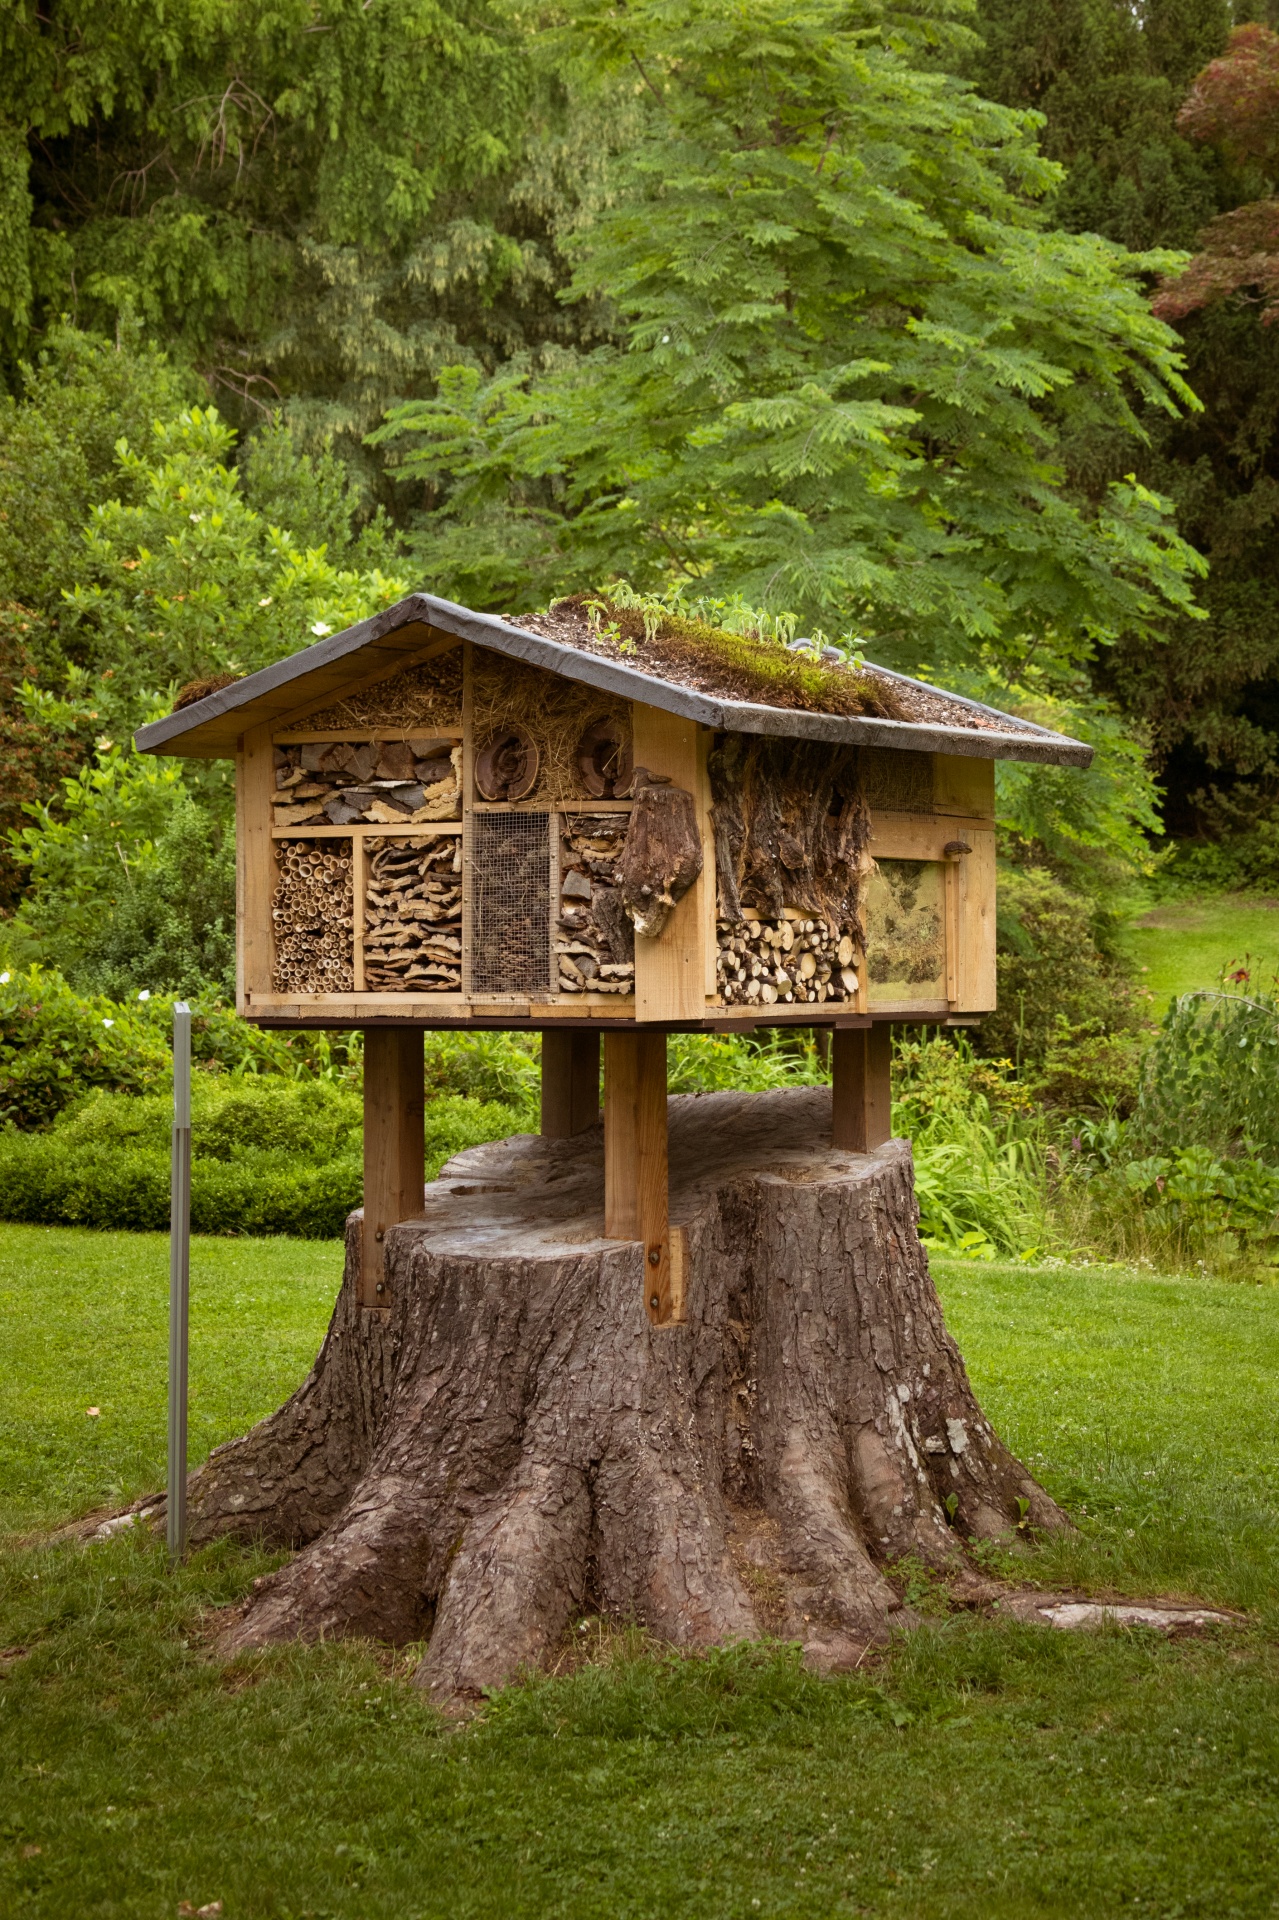 Large bug hotel in a park